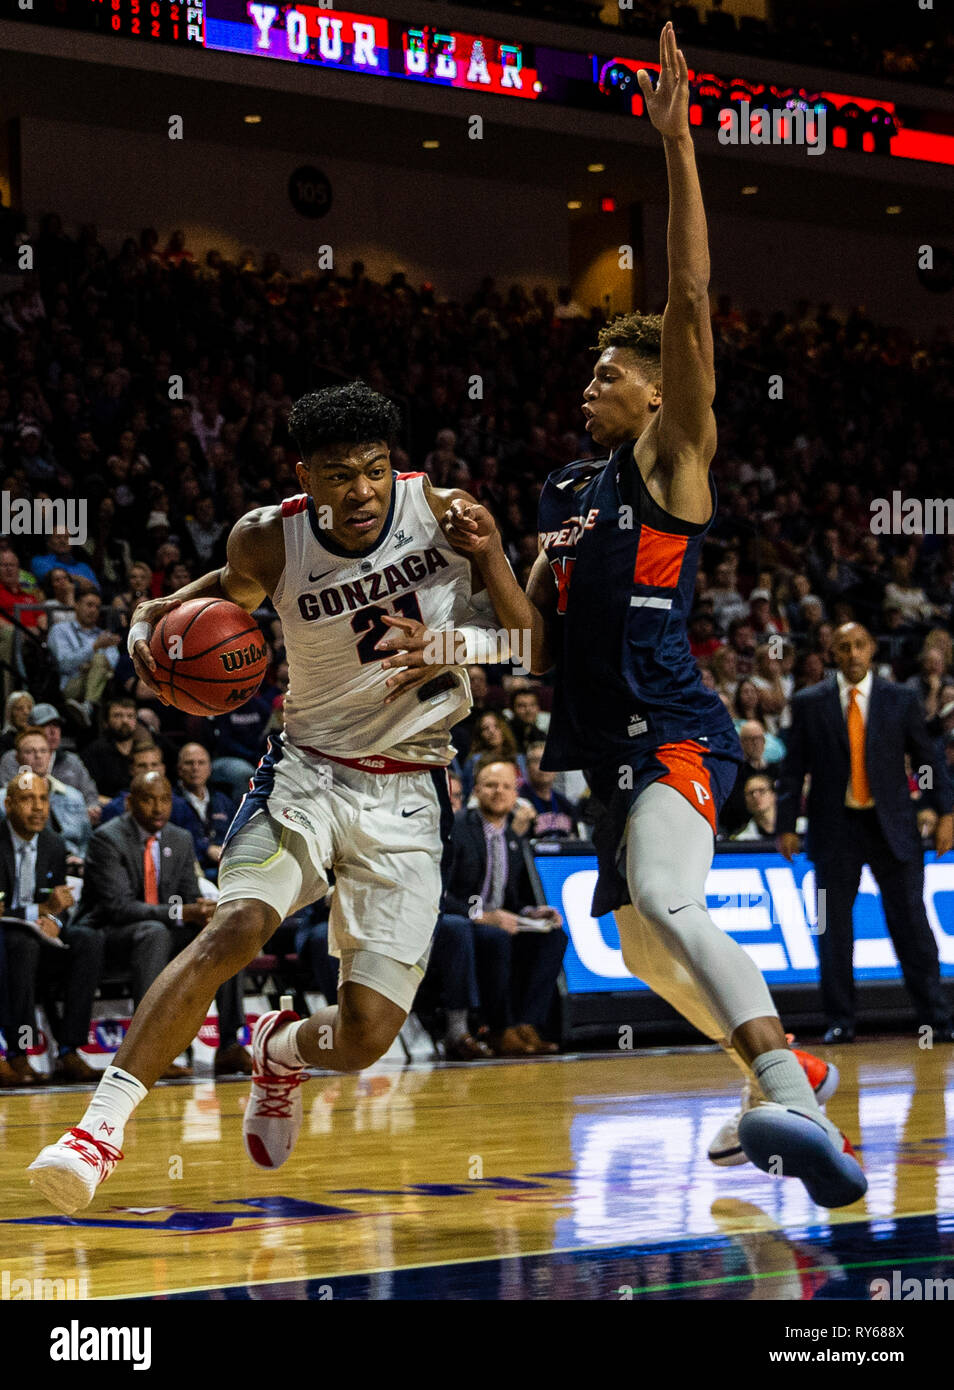 Mar 11 2019 Las Vegas, NV, U.S.A. Gonzaga forward Rui Hachimura (21) drives to the basket during the NCAA West Coast Conference Men's Basketball Tournament semi -final between the Pepperdine Wave and the Gonzaga Bulldogs 100-74 win at Orleans Arena Las Vegas, NV. Thurman James/CSM Stock Photo